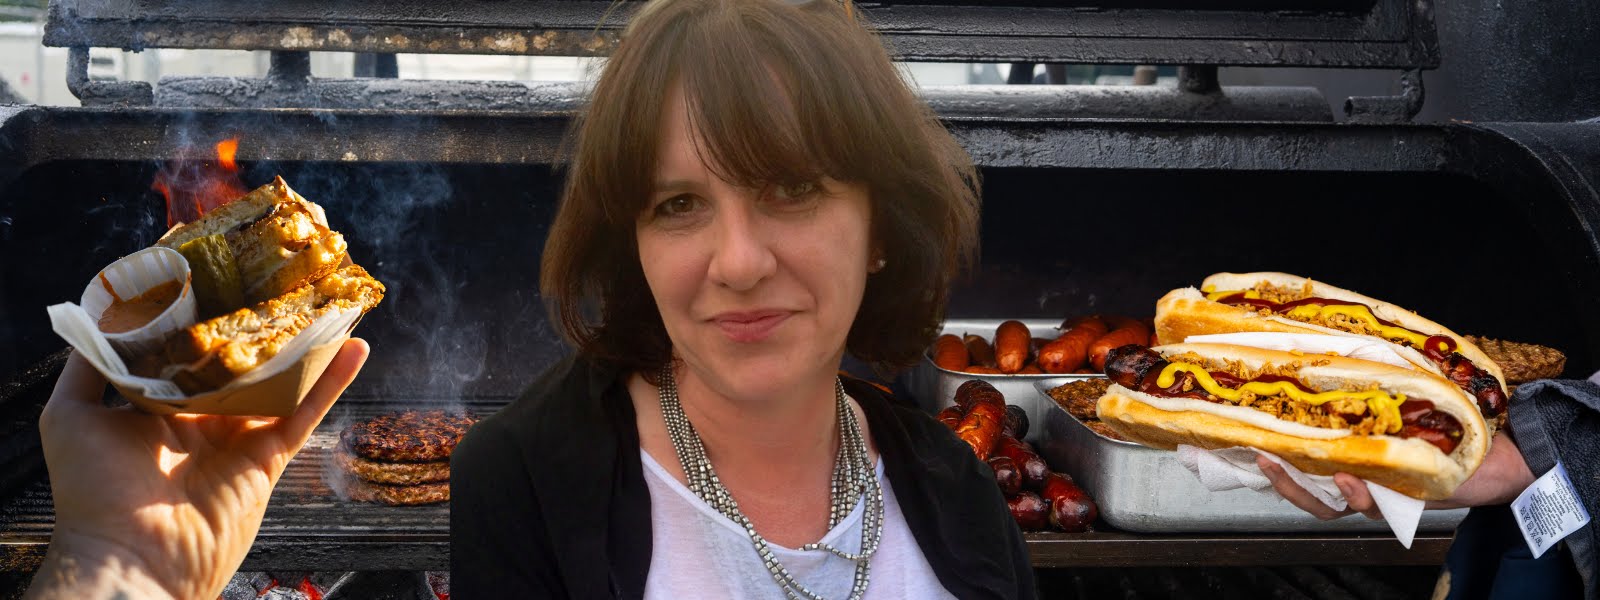 All Together Now’s festival food coordinator Vanessa Clarke on her life in food